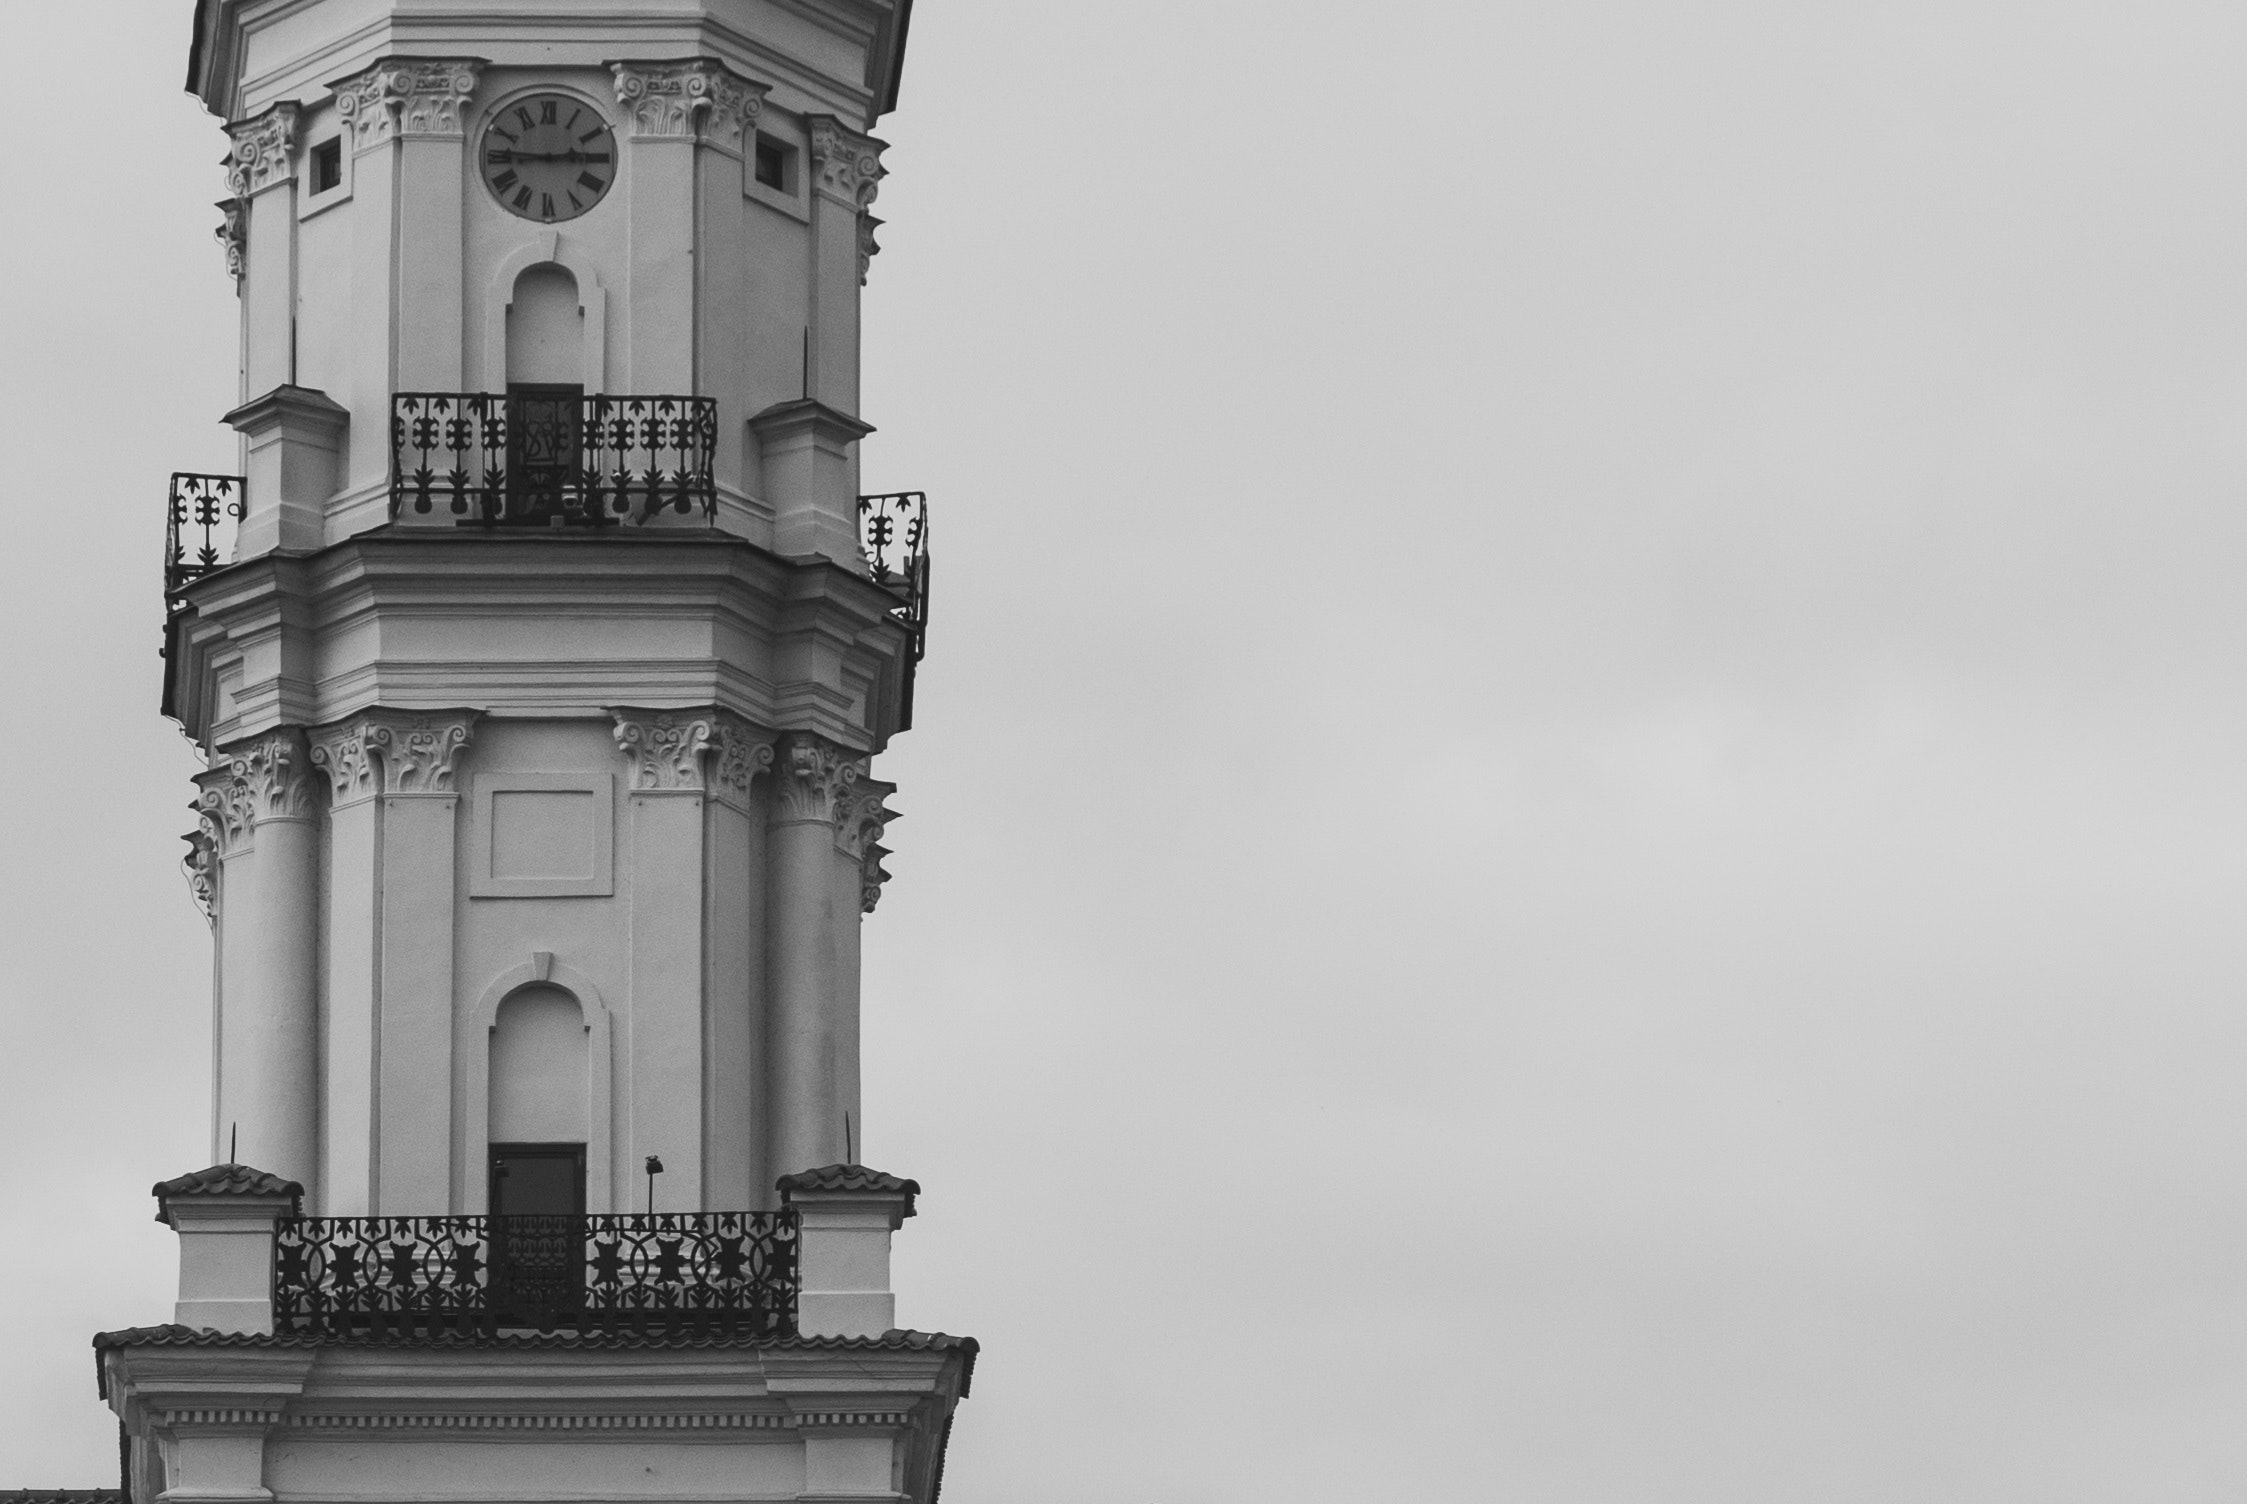 Grayscale photography of tower during daytime